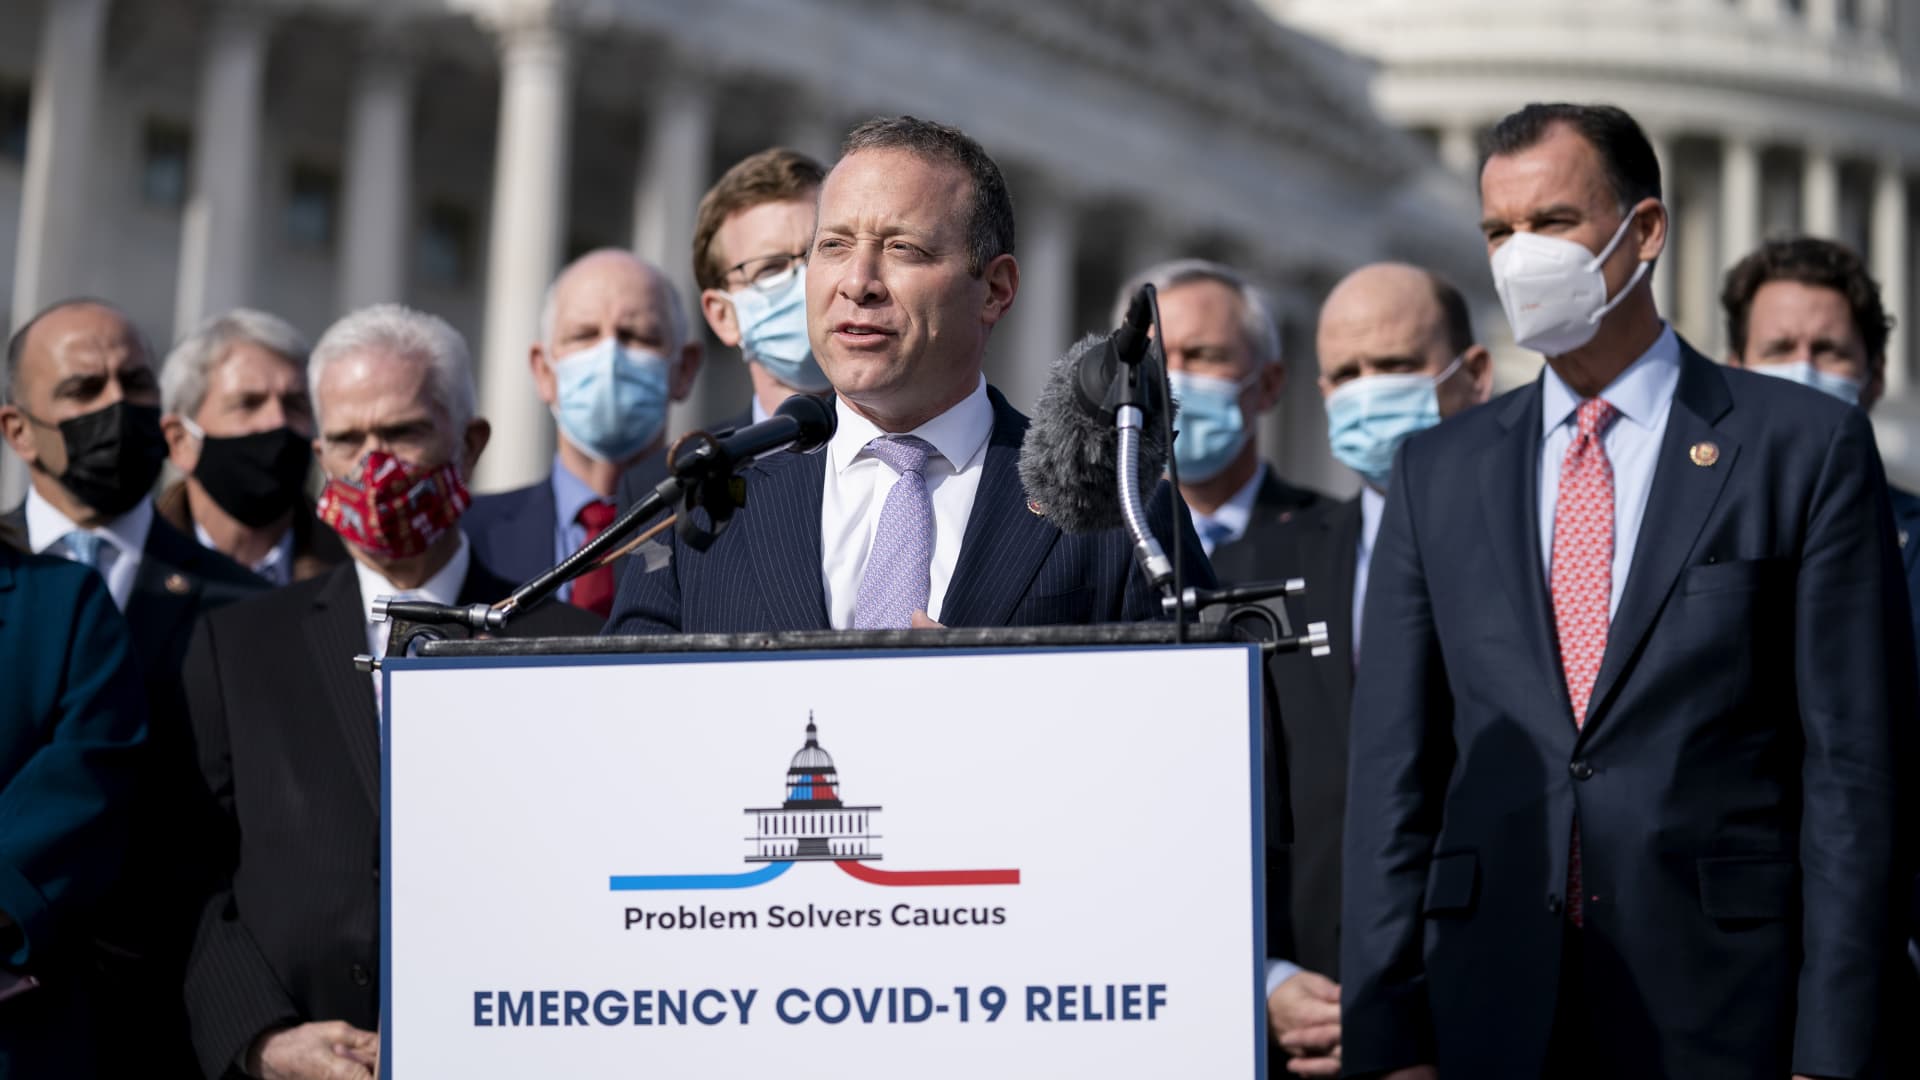 Bipartisan group releases Covid relief bill as Congress faces pressure to send help